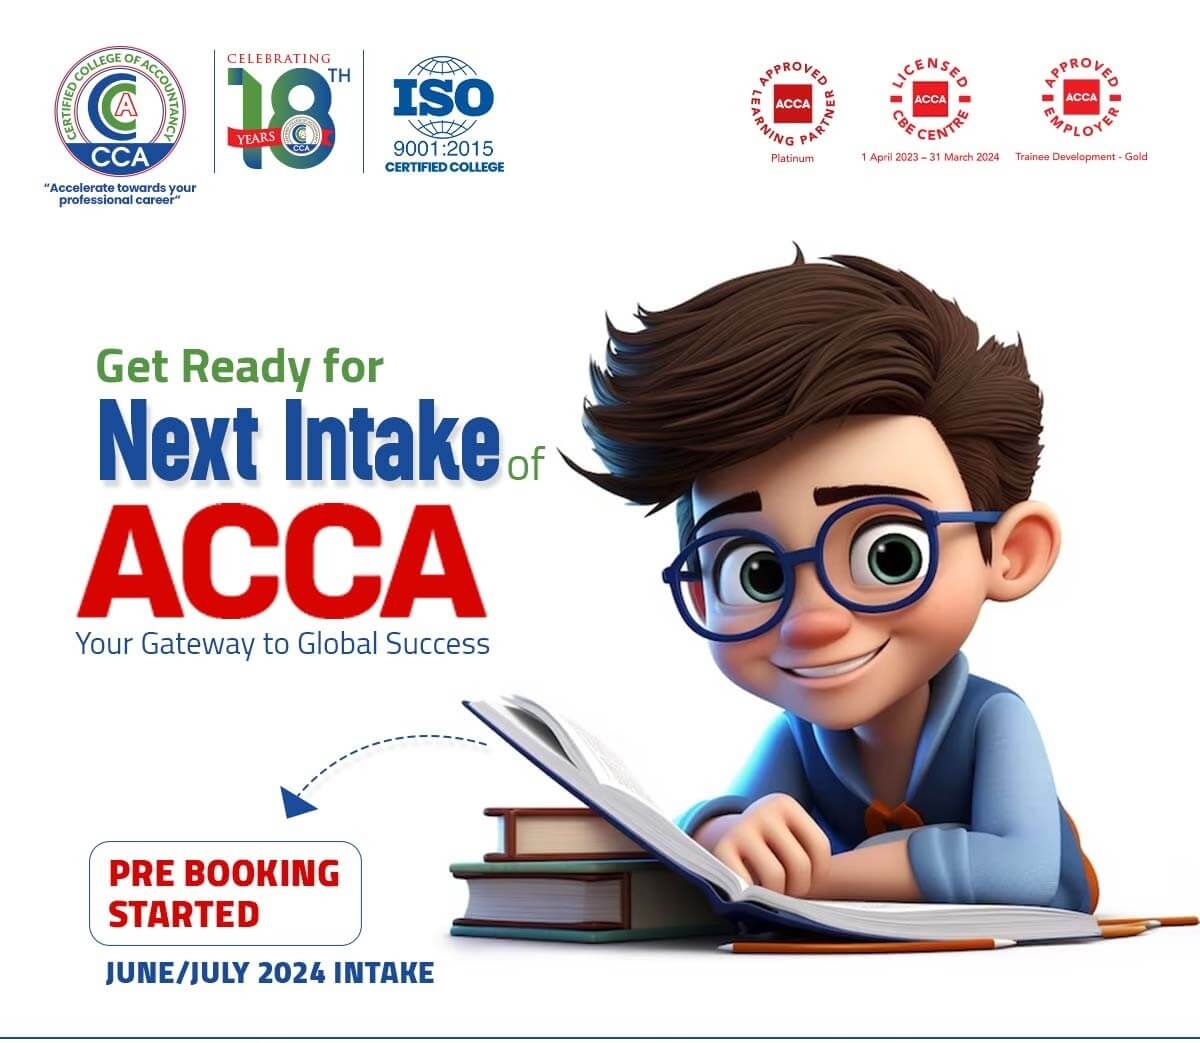 ACCA Program Pre-Booking Open for June July 2024 Intake at CCA